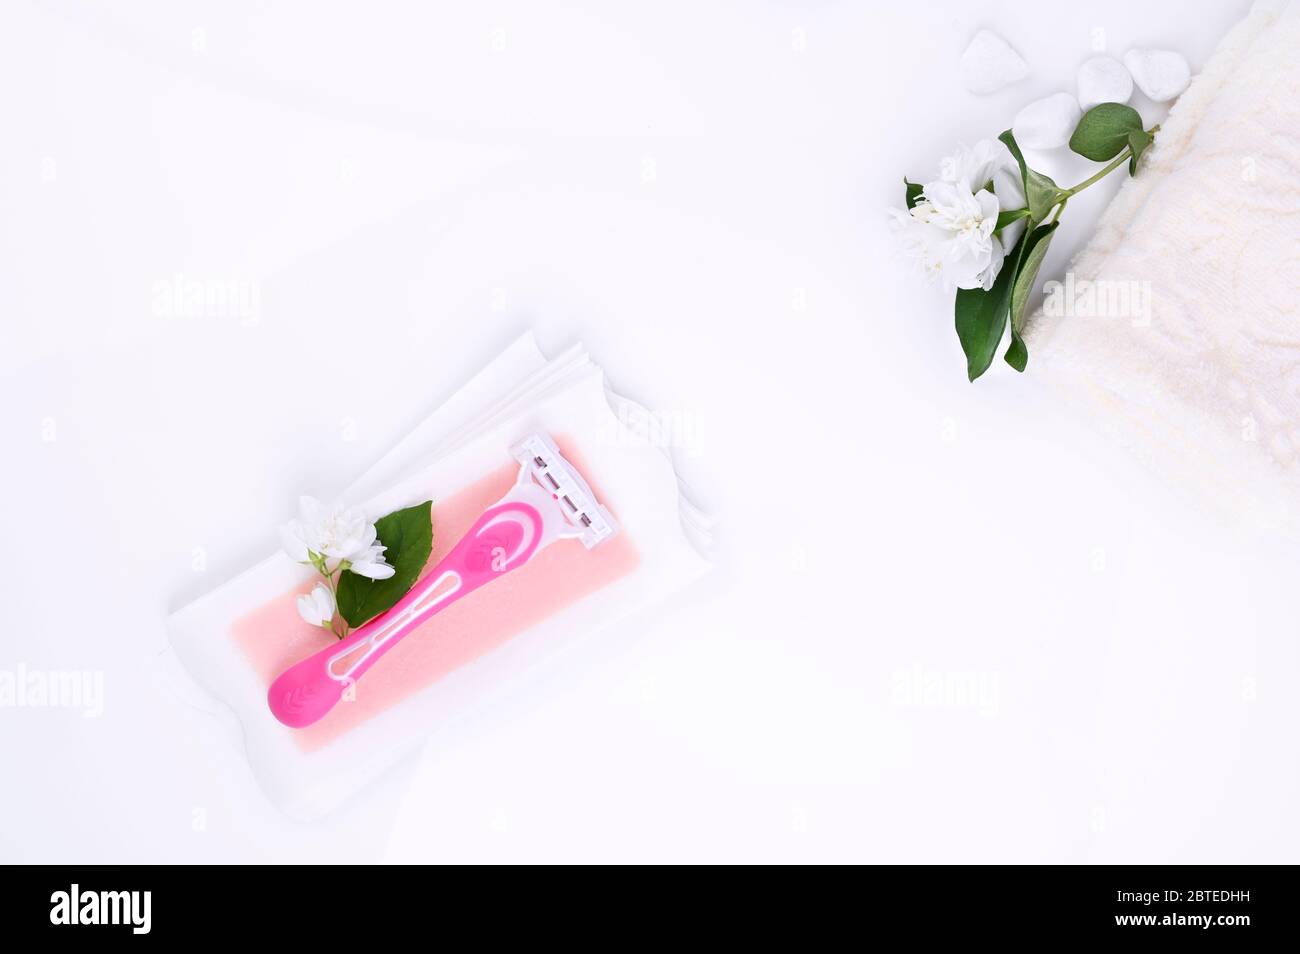 a set of different means for epilation on a colored background. Removal of unwanted hair. Body care products, towels, jasmine flowers, wax strips, razor. Minimalism, top view. flatlay. Stock Photo